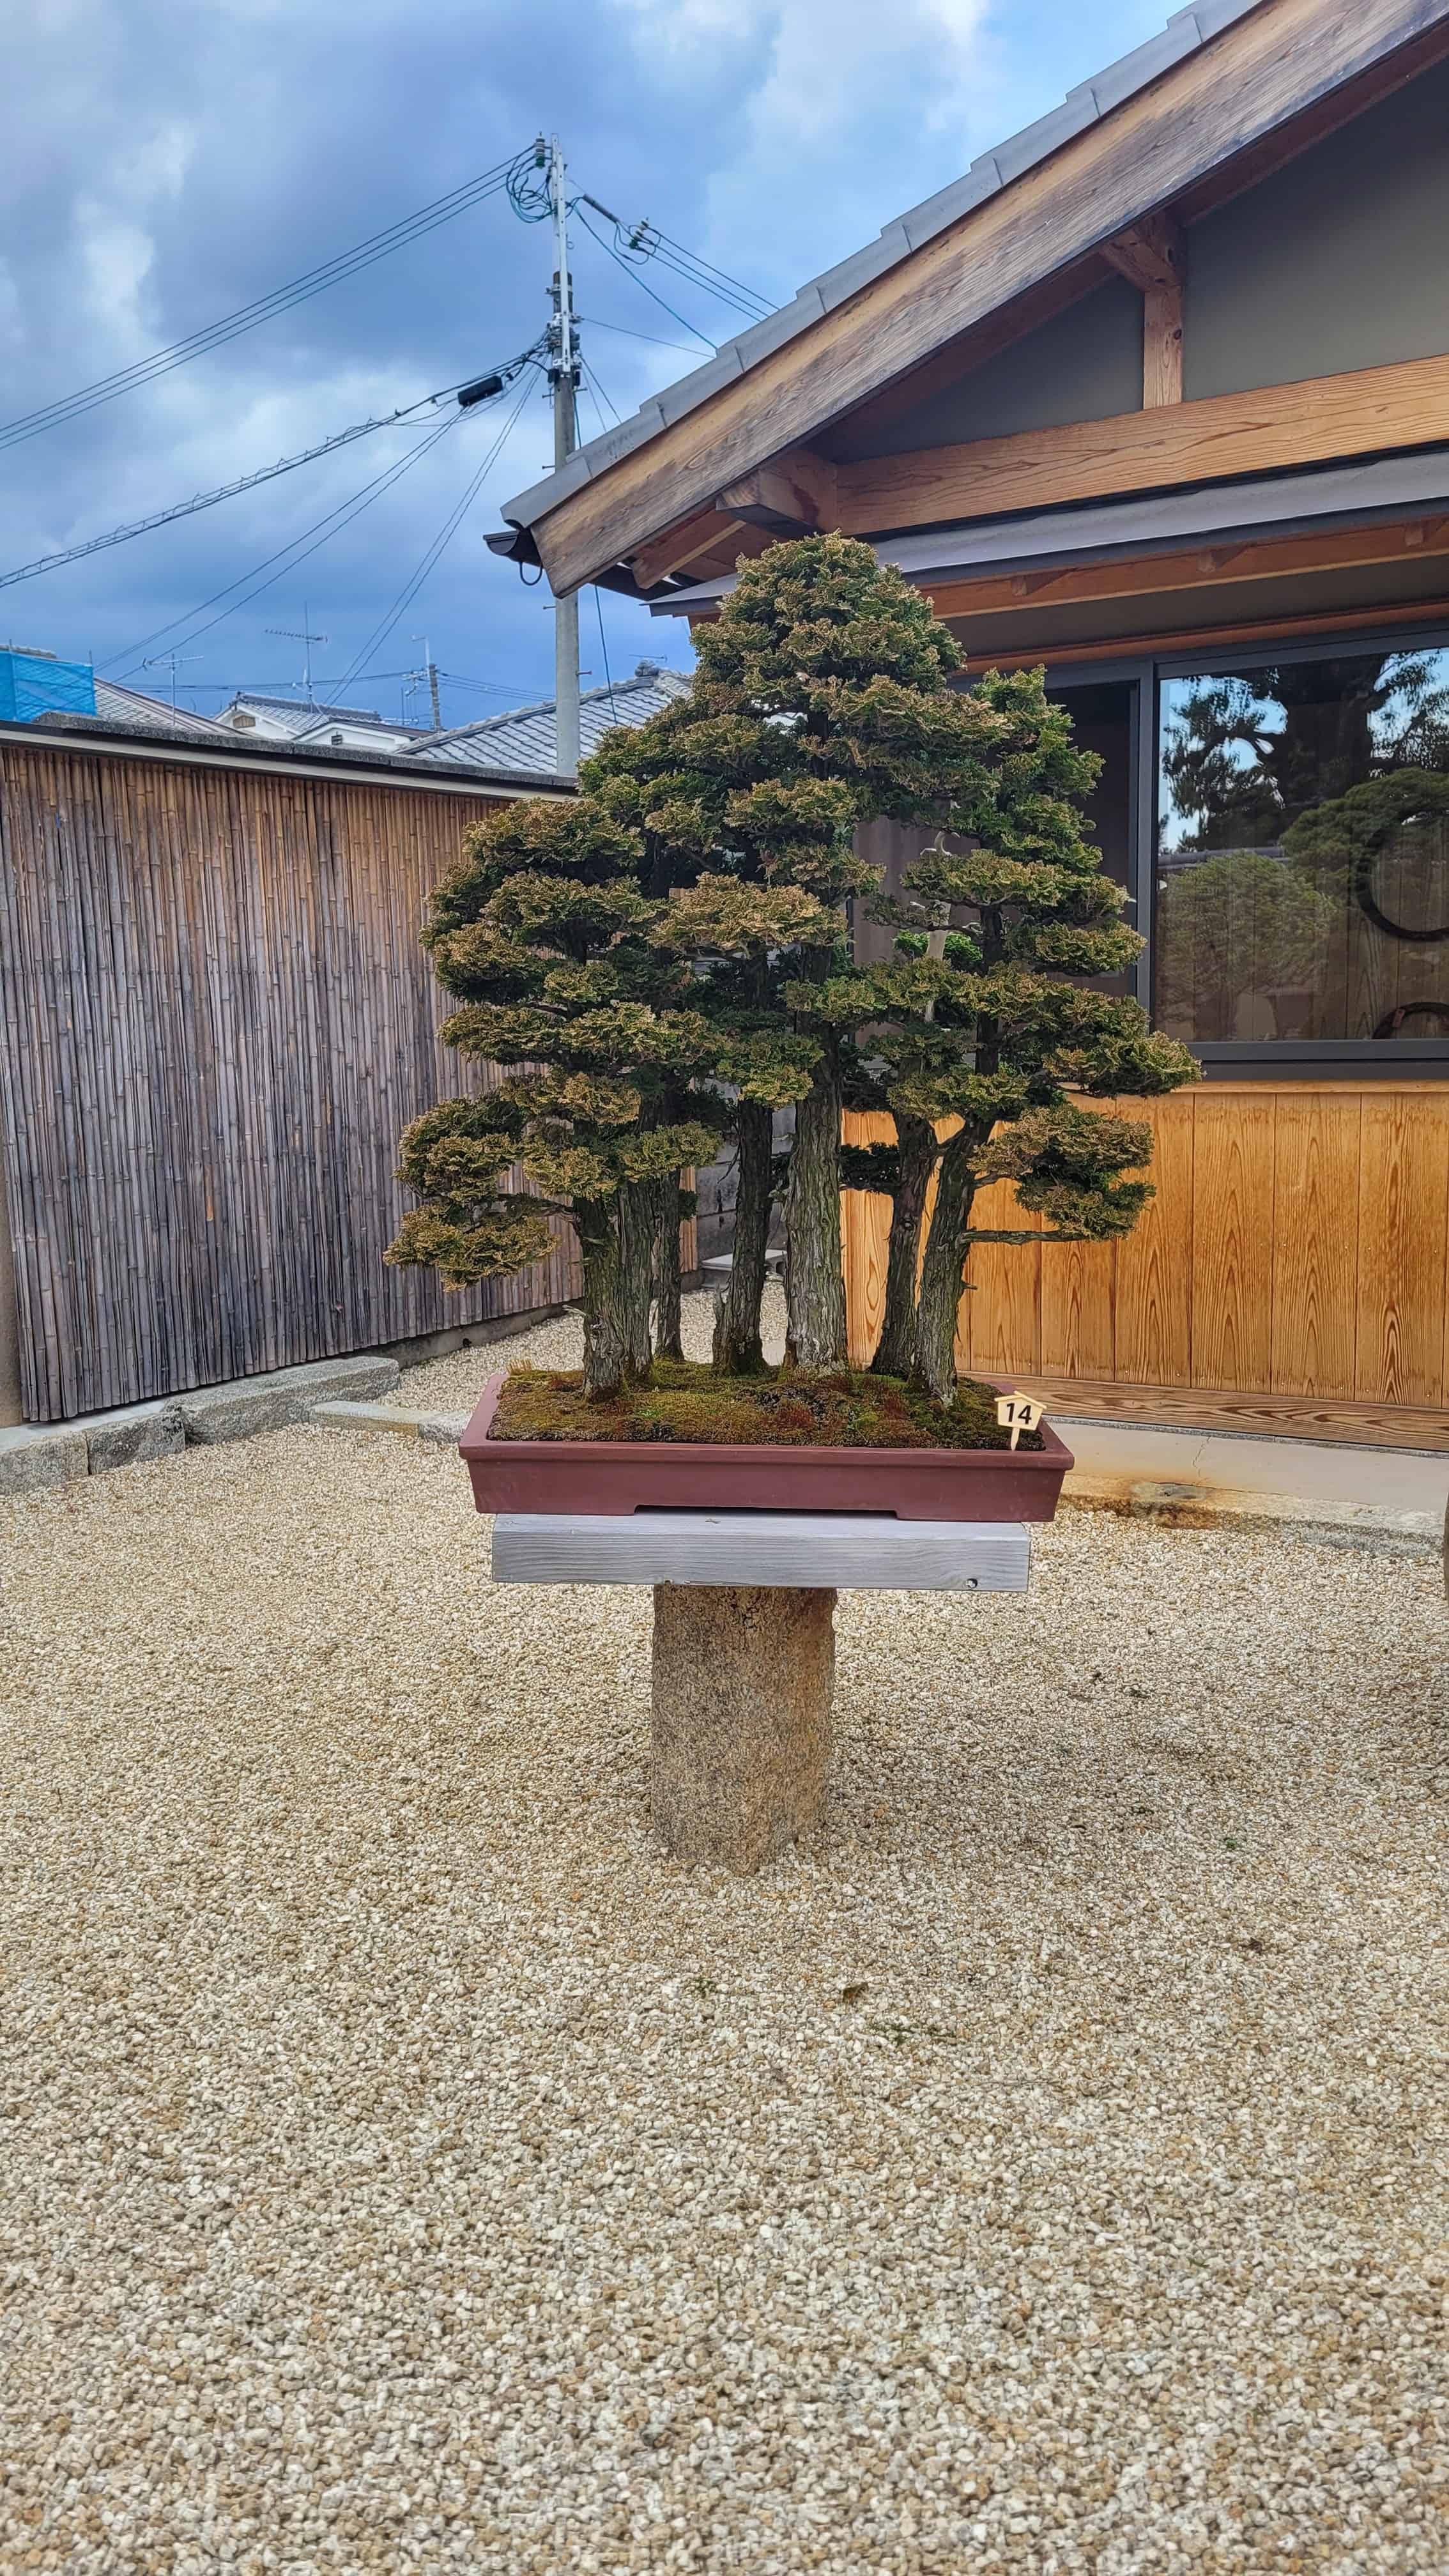 A cypress bonsai tree from kyoto in Japan